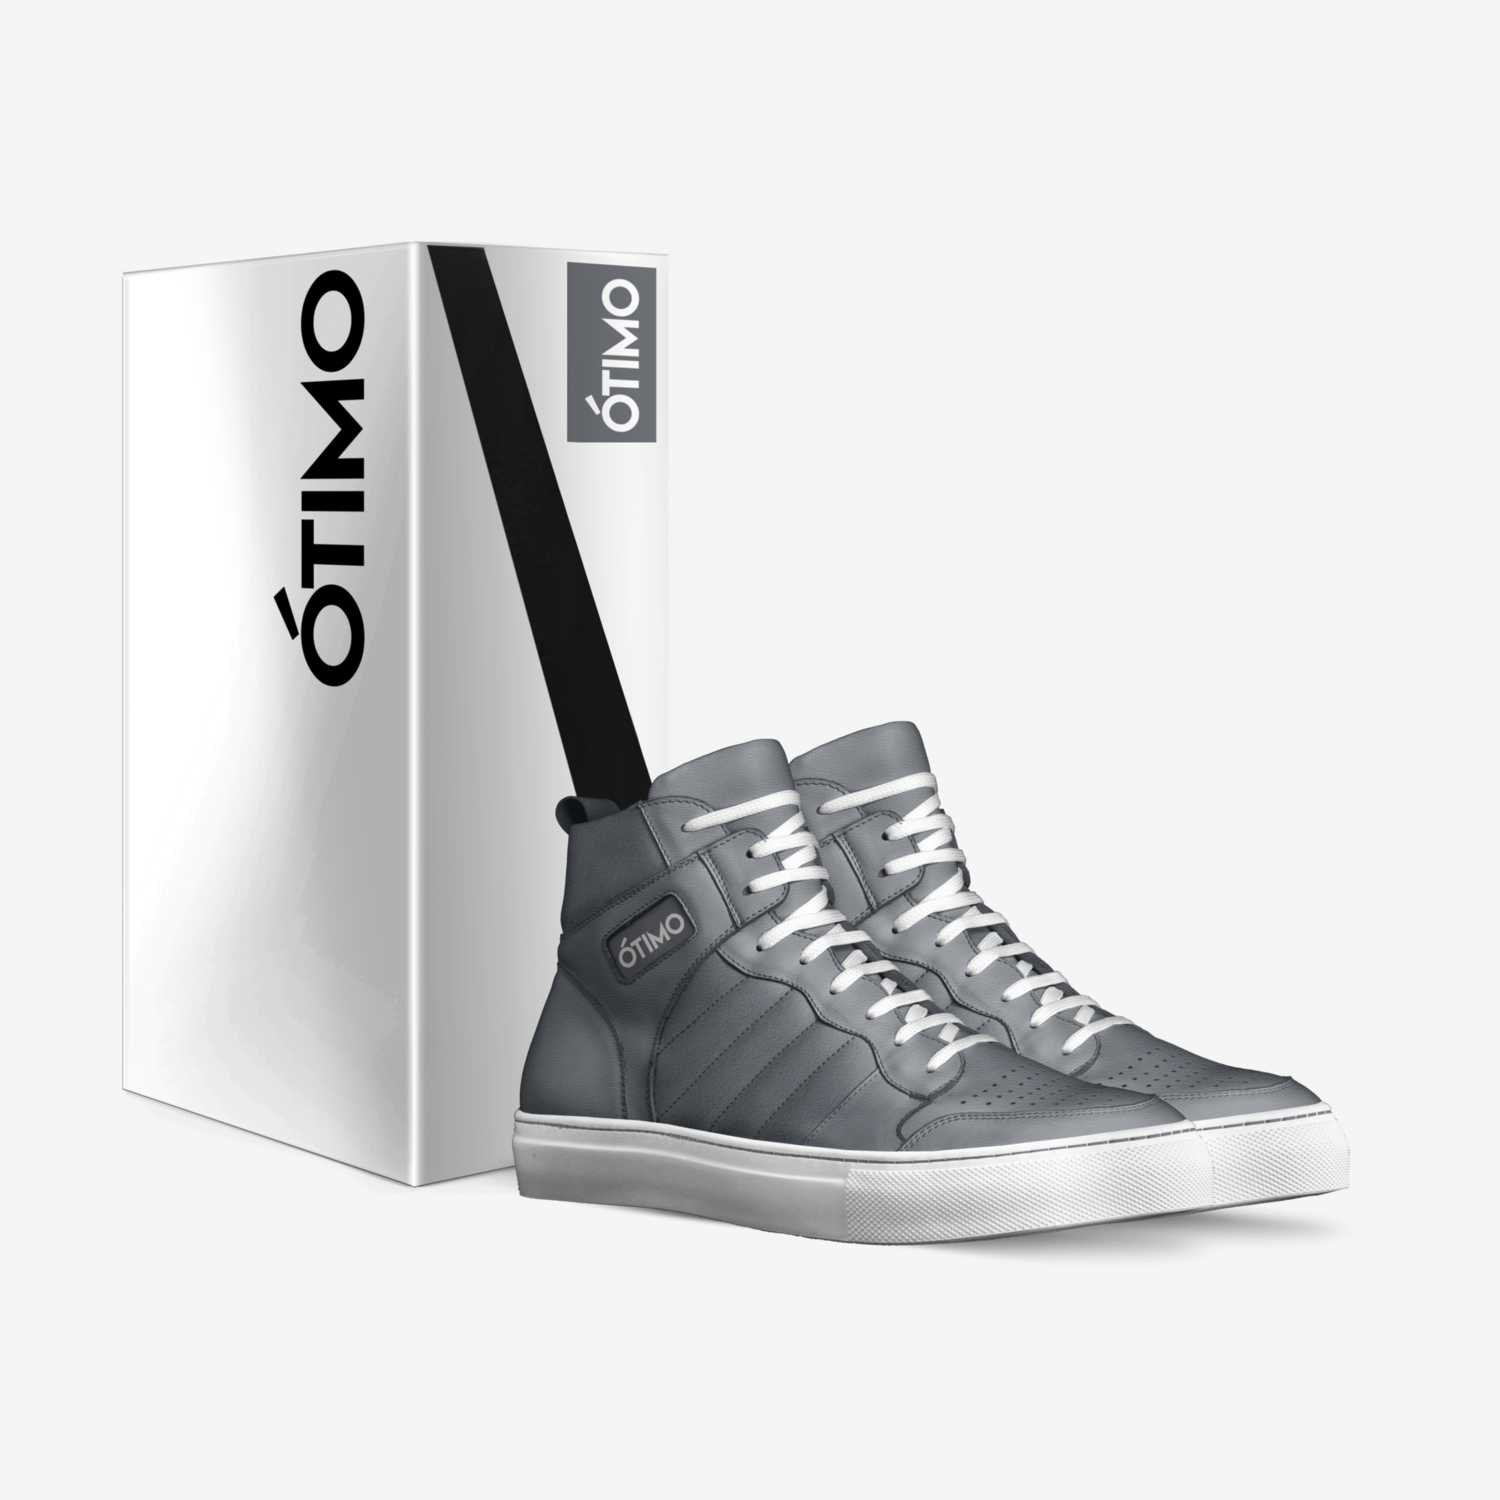 Otimo custom made in Italy shoes by Phillip Dominguez | Box view